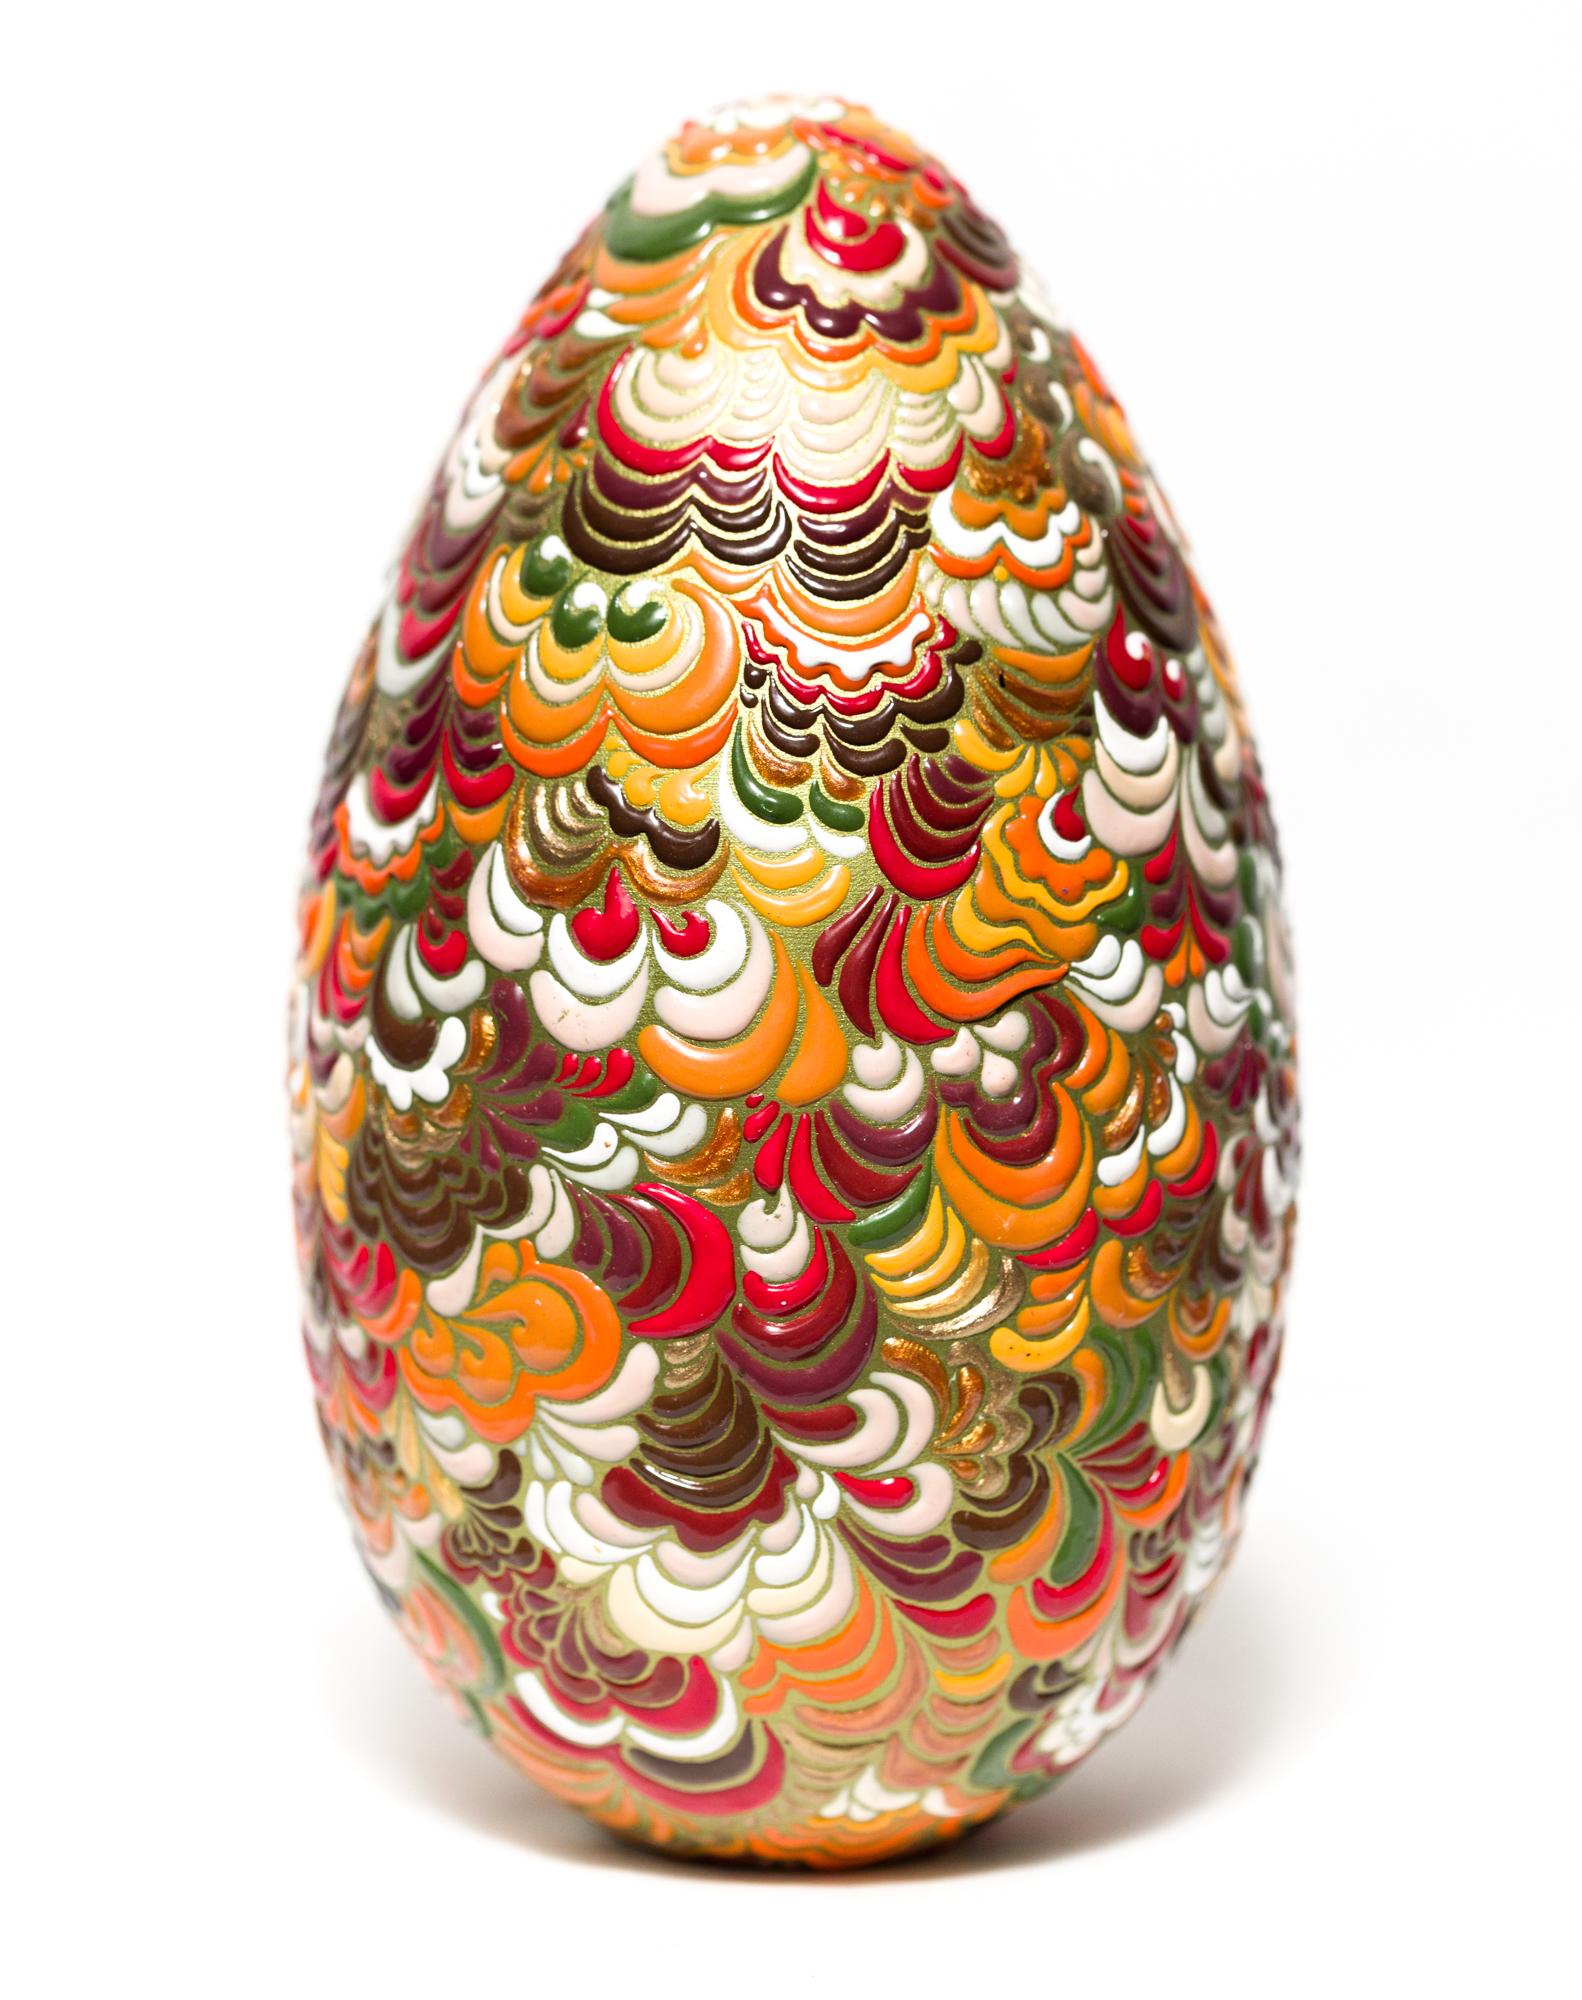 PJ Linden Abstract Sculpture - "Lenor Larson Egg", Pattern, Brand Design, Texture, Red, Gold, Abstract